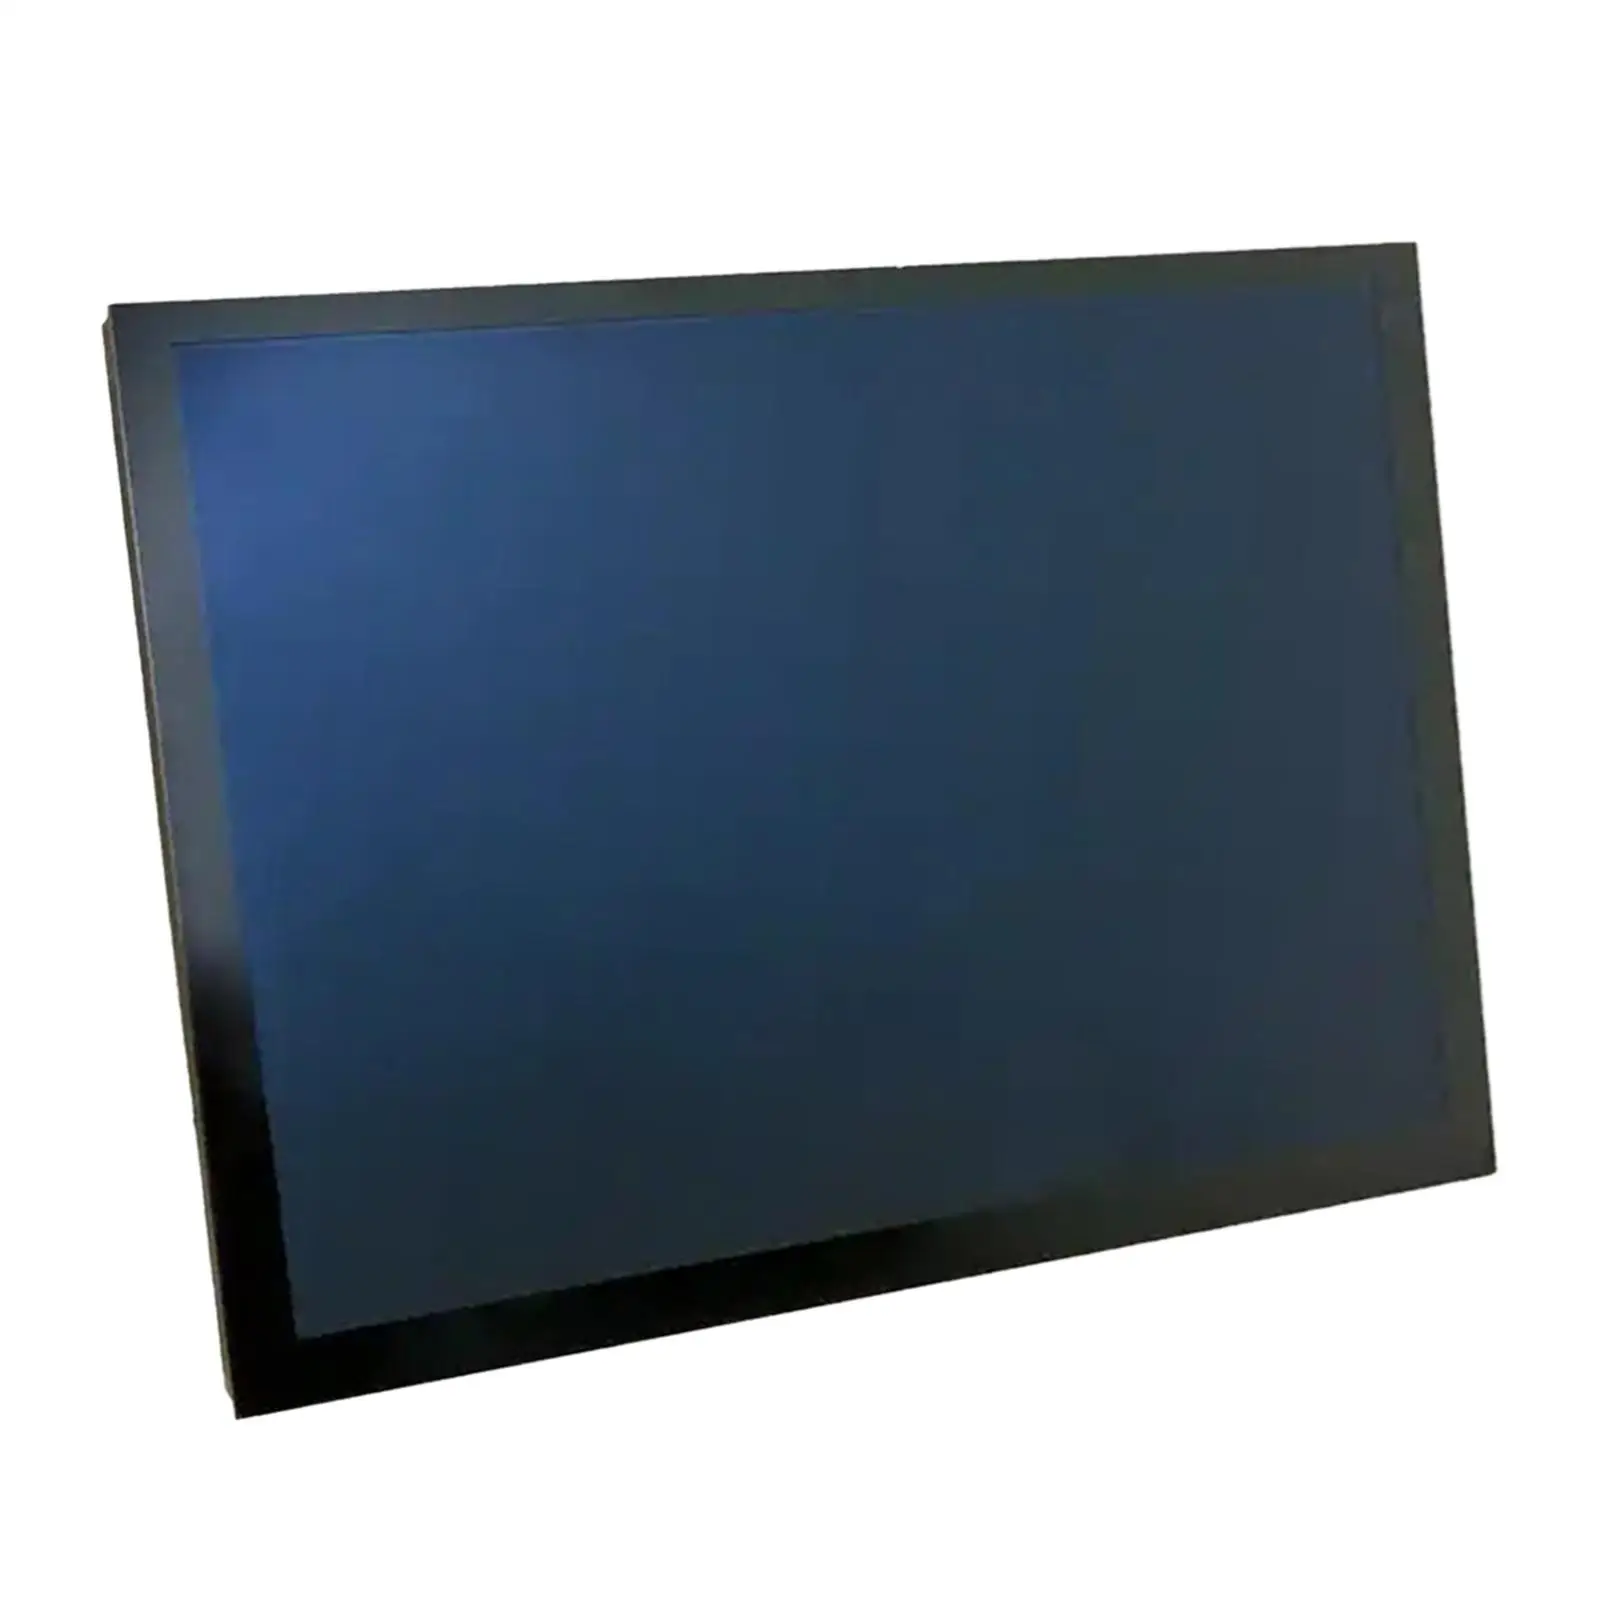 8.4 Inches Touch Screen LA084x01 Durable Display Screen for Chrysler